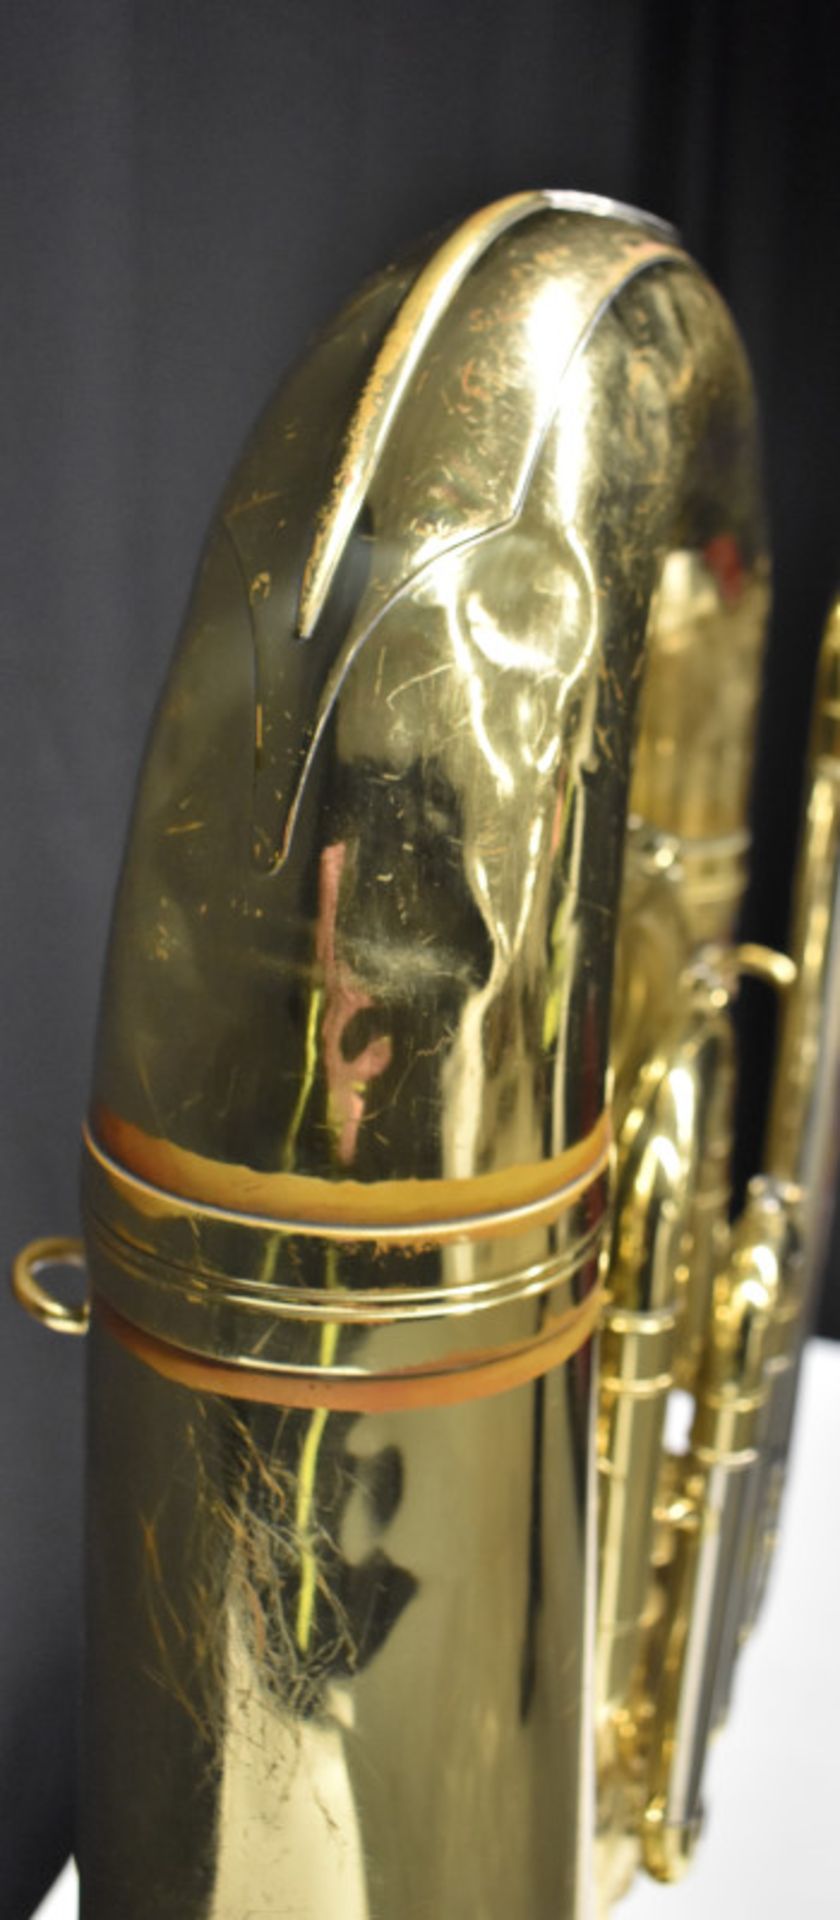 Besson Sovereign BE982 Tuba in Besson Case (missing wheel) - Serial No. 866164 - (two fi - Image 13 of 21